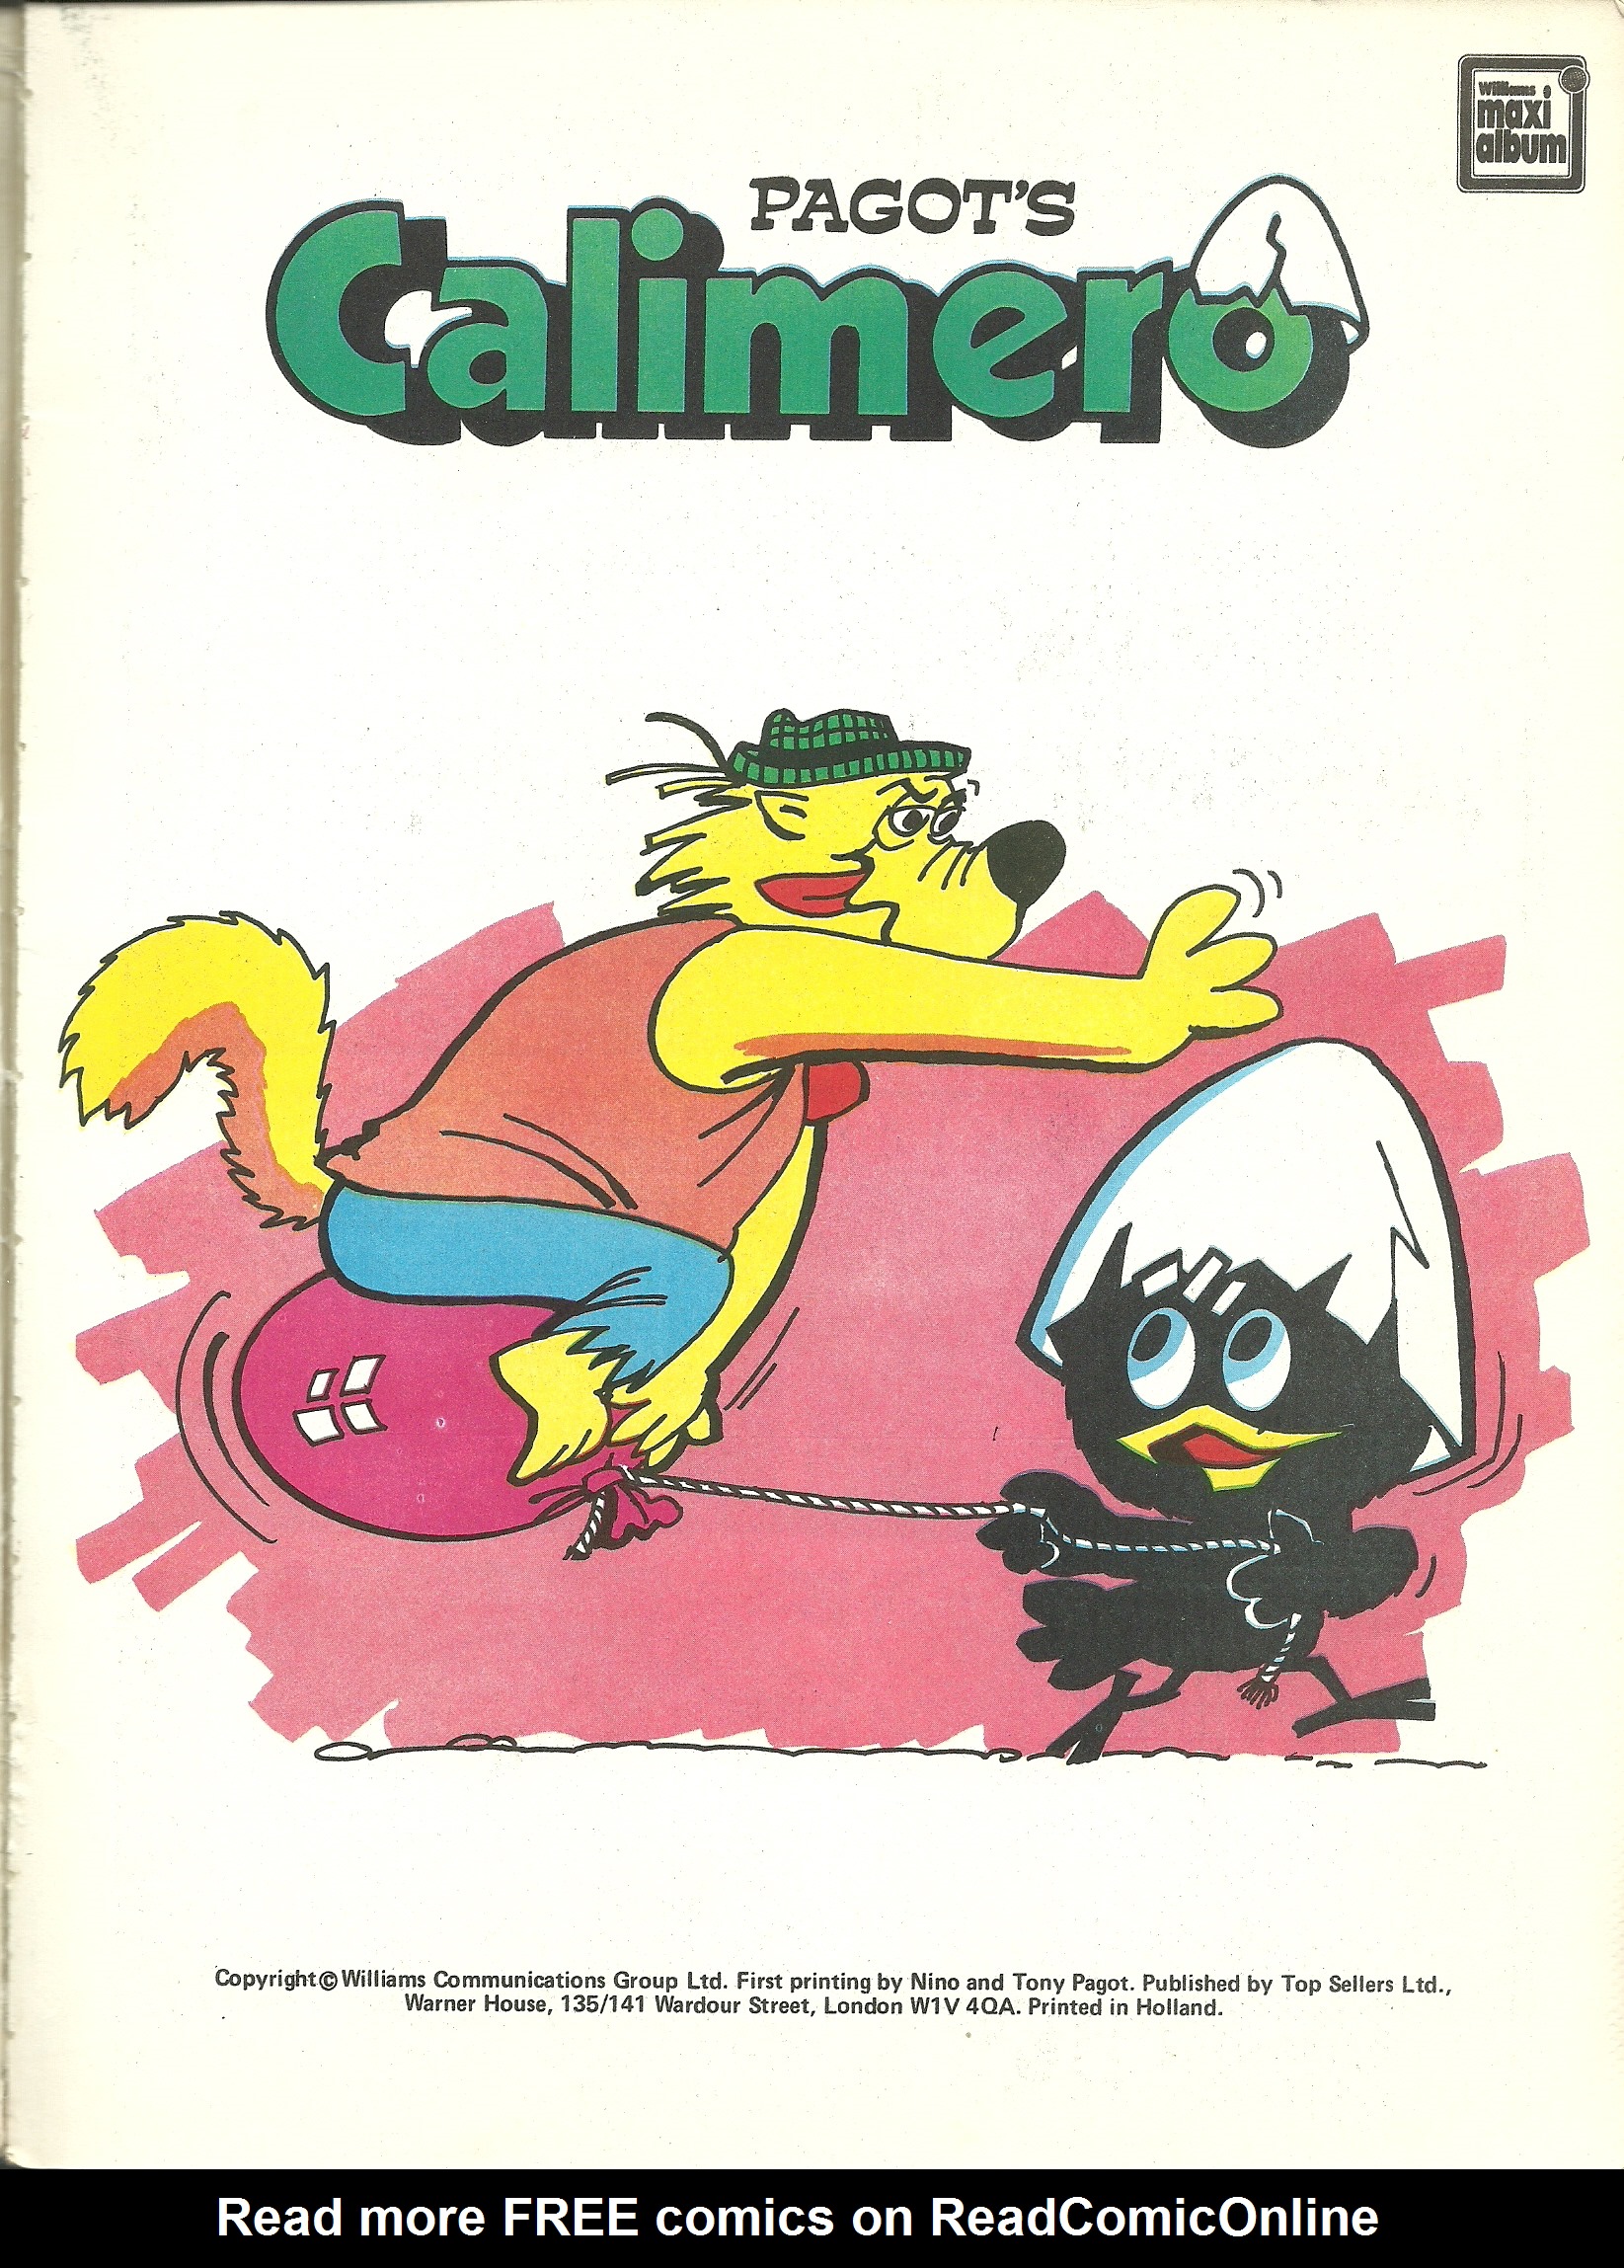 Read online Pagot's Calimero comic -  Issue # Full - 2